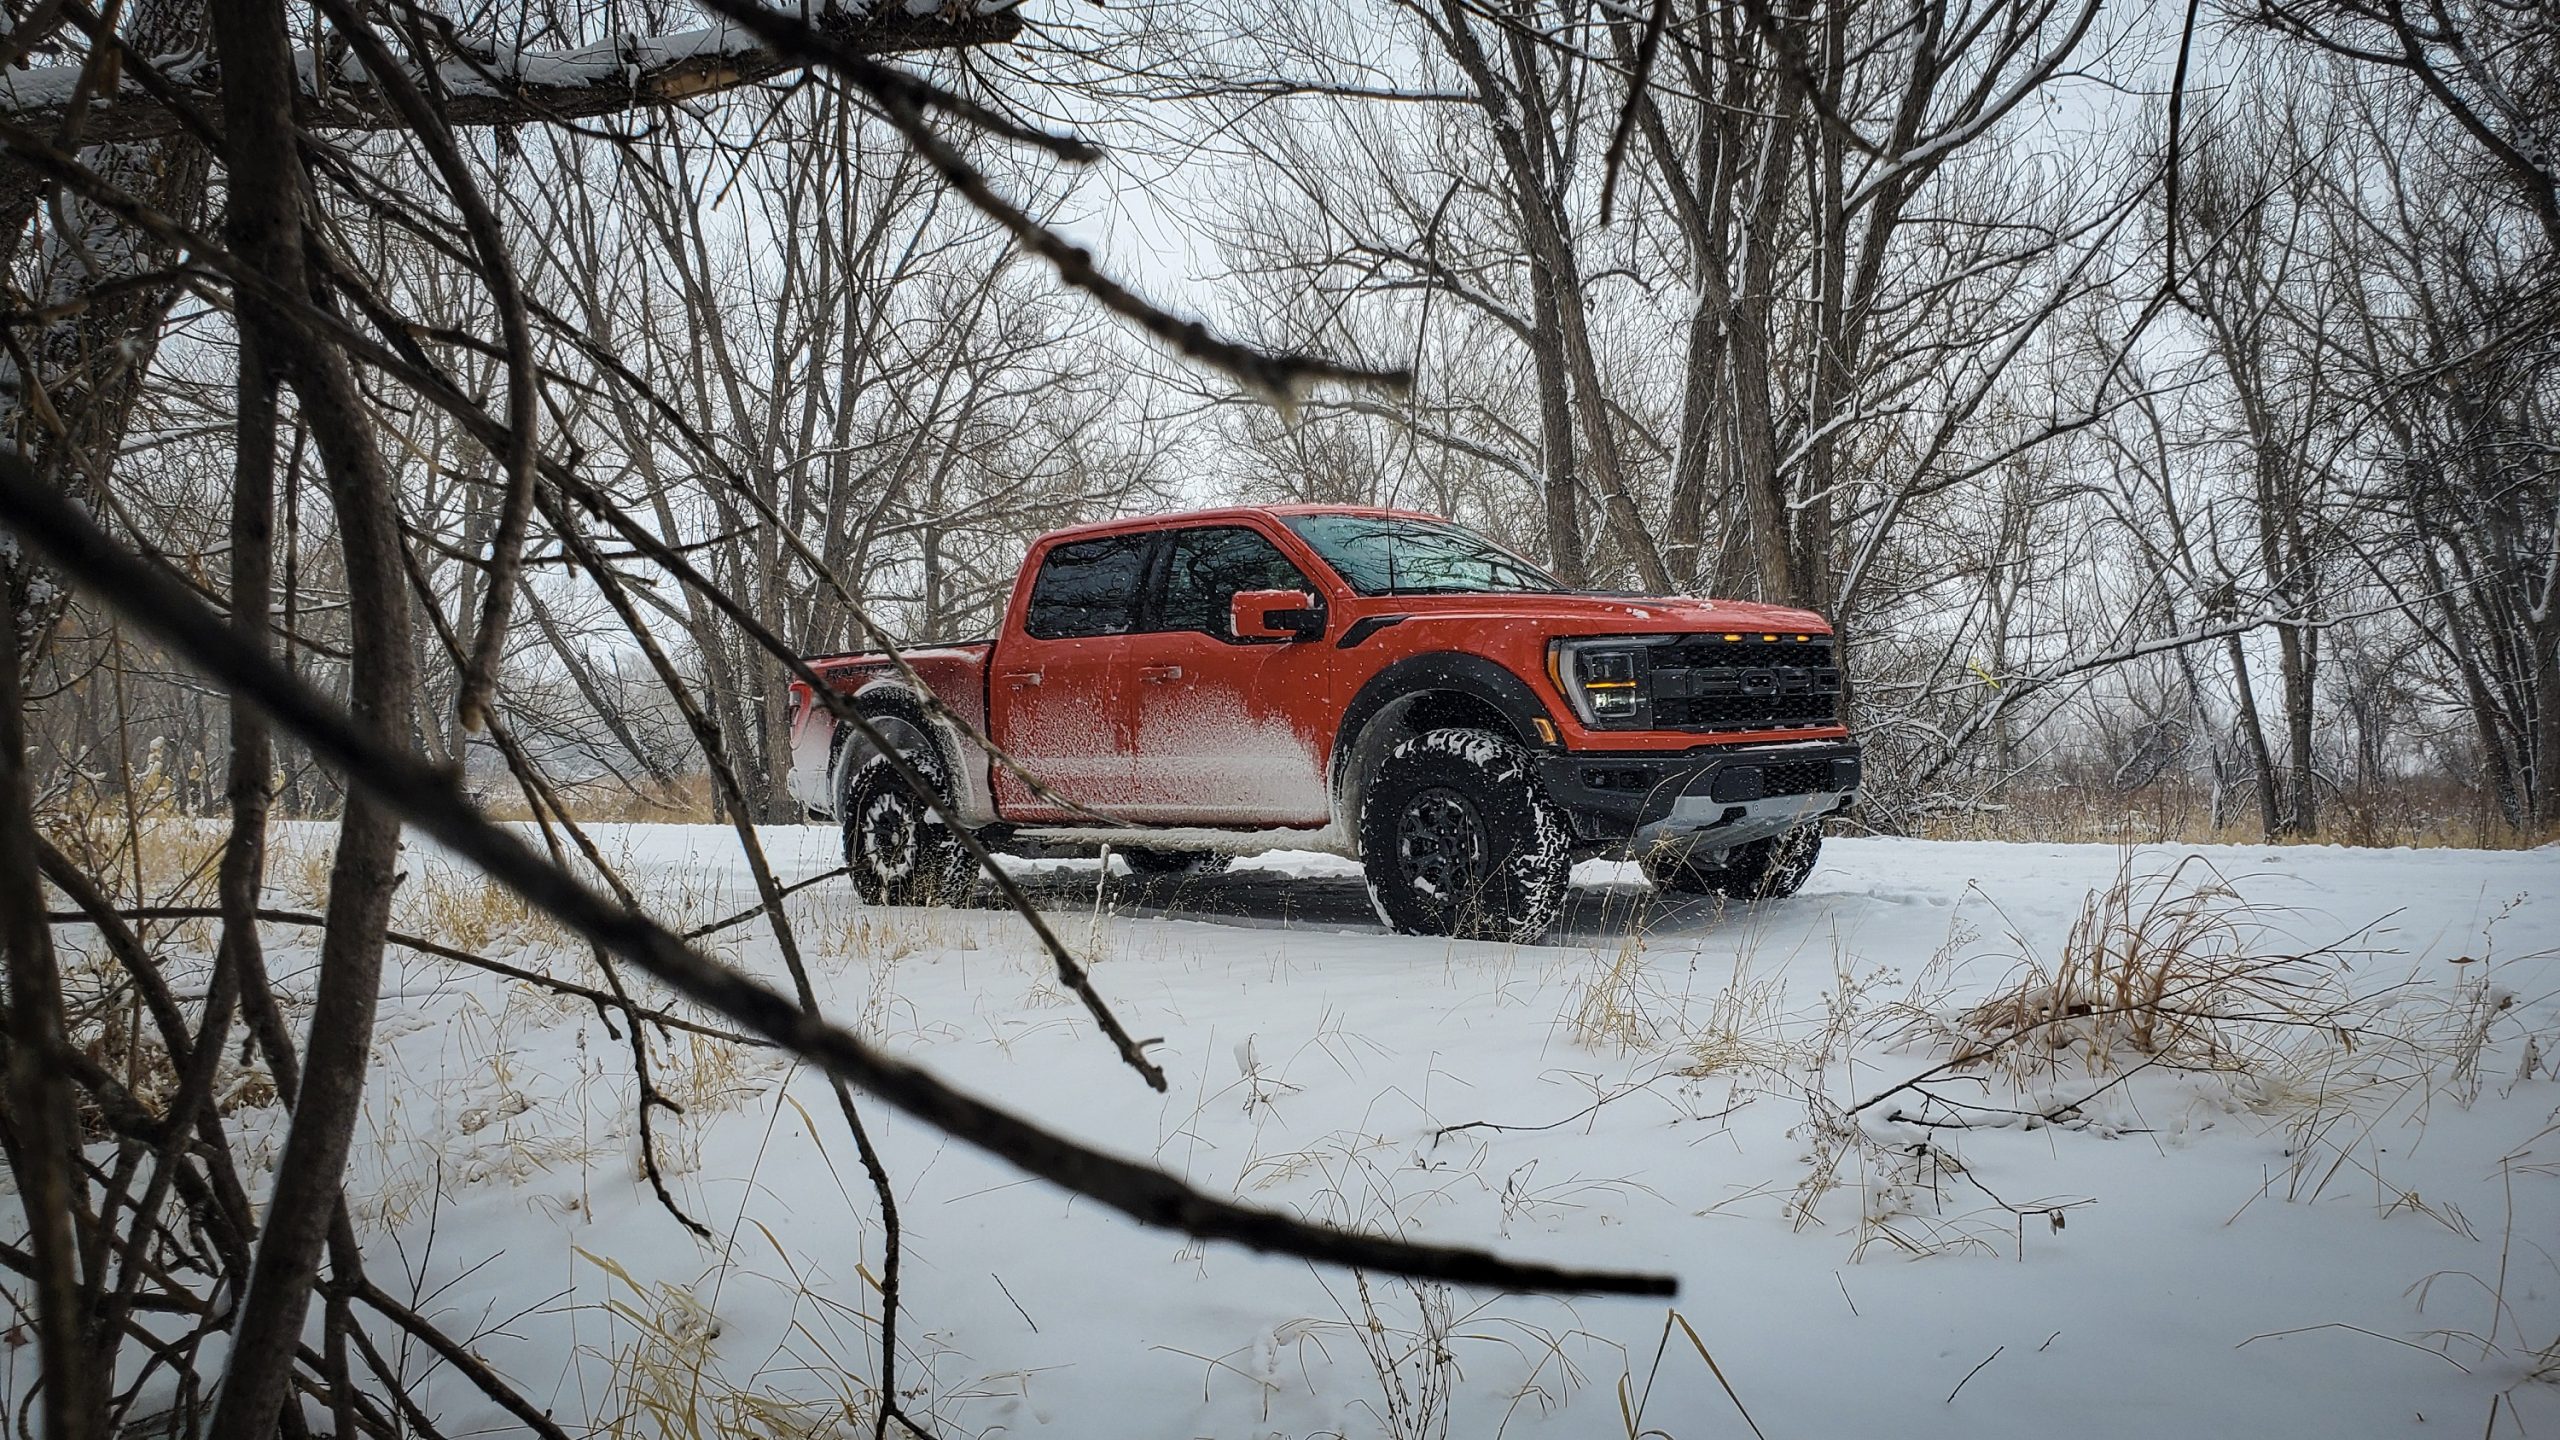 A 3/4 shot through the trees of the 2021 Ford Raptor 37 in orange